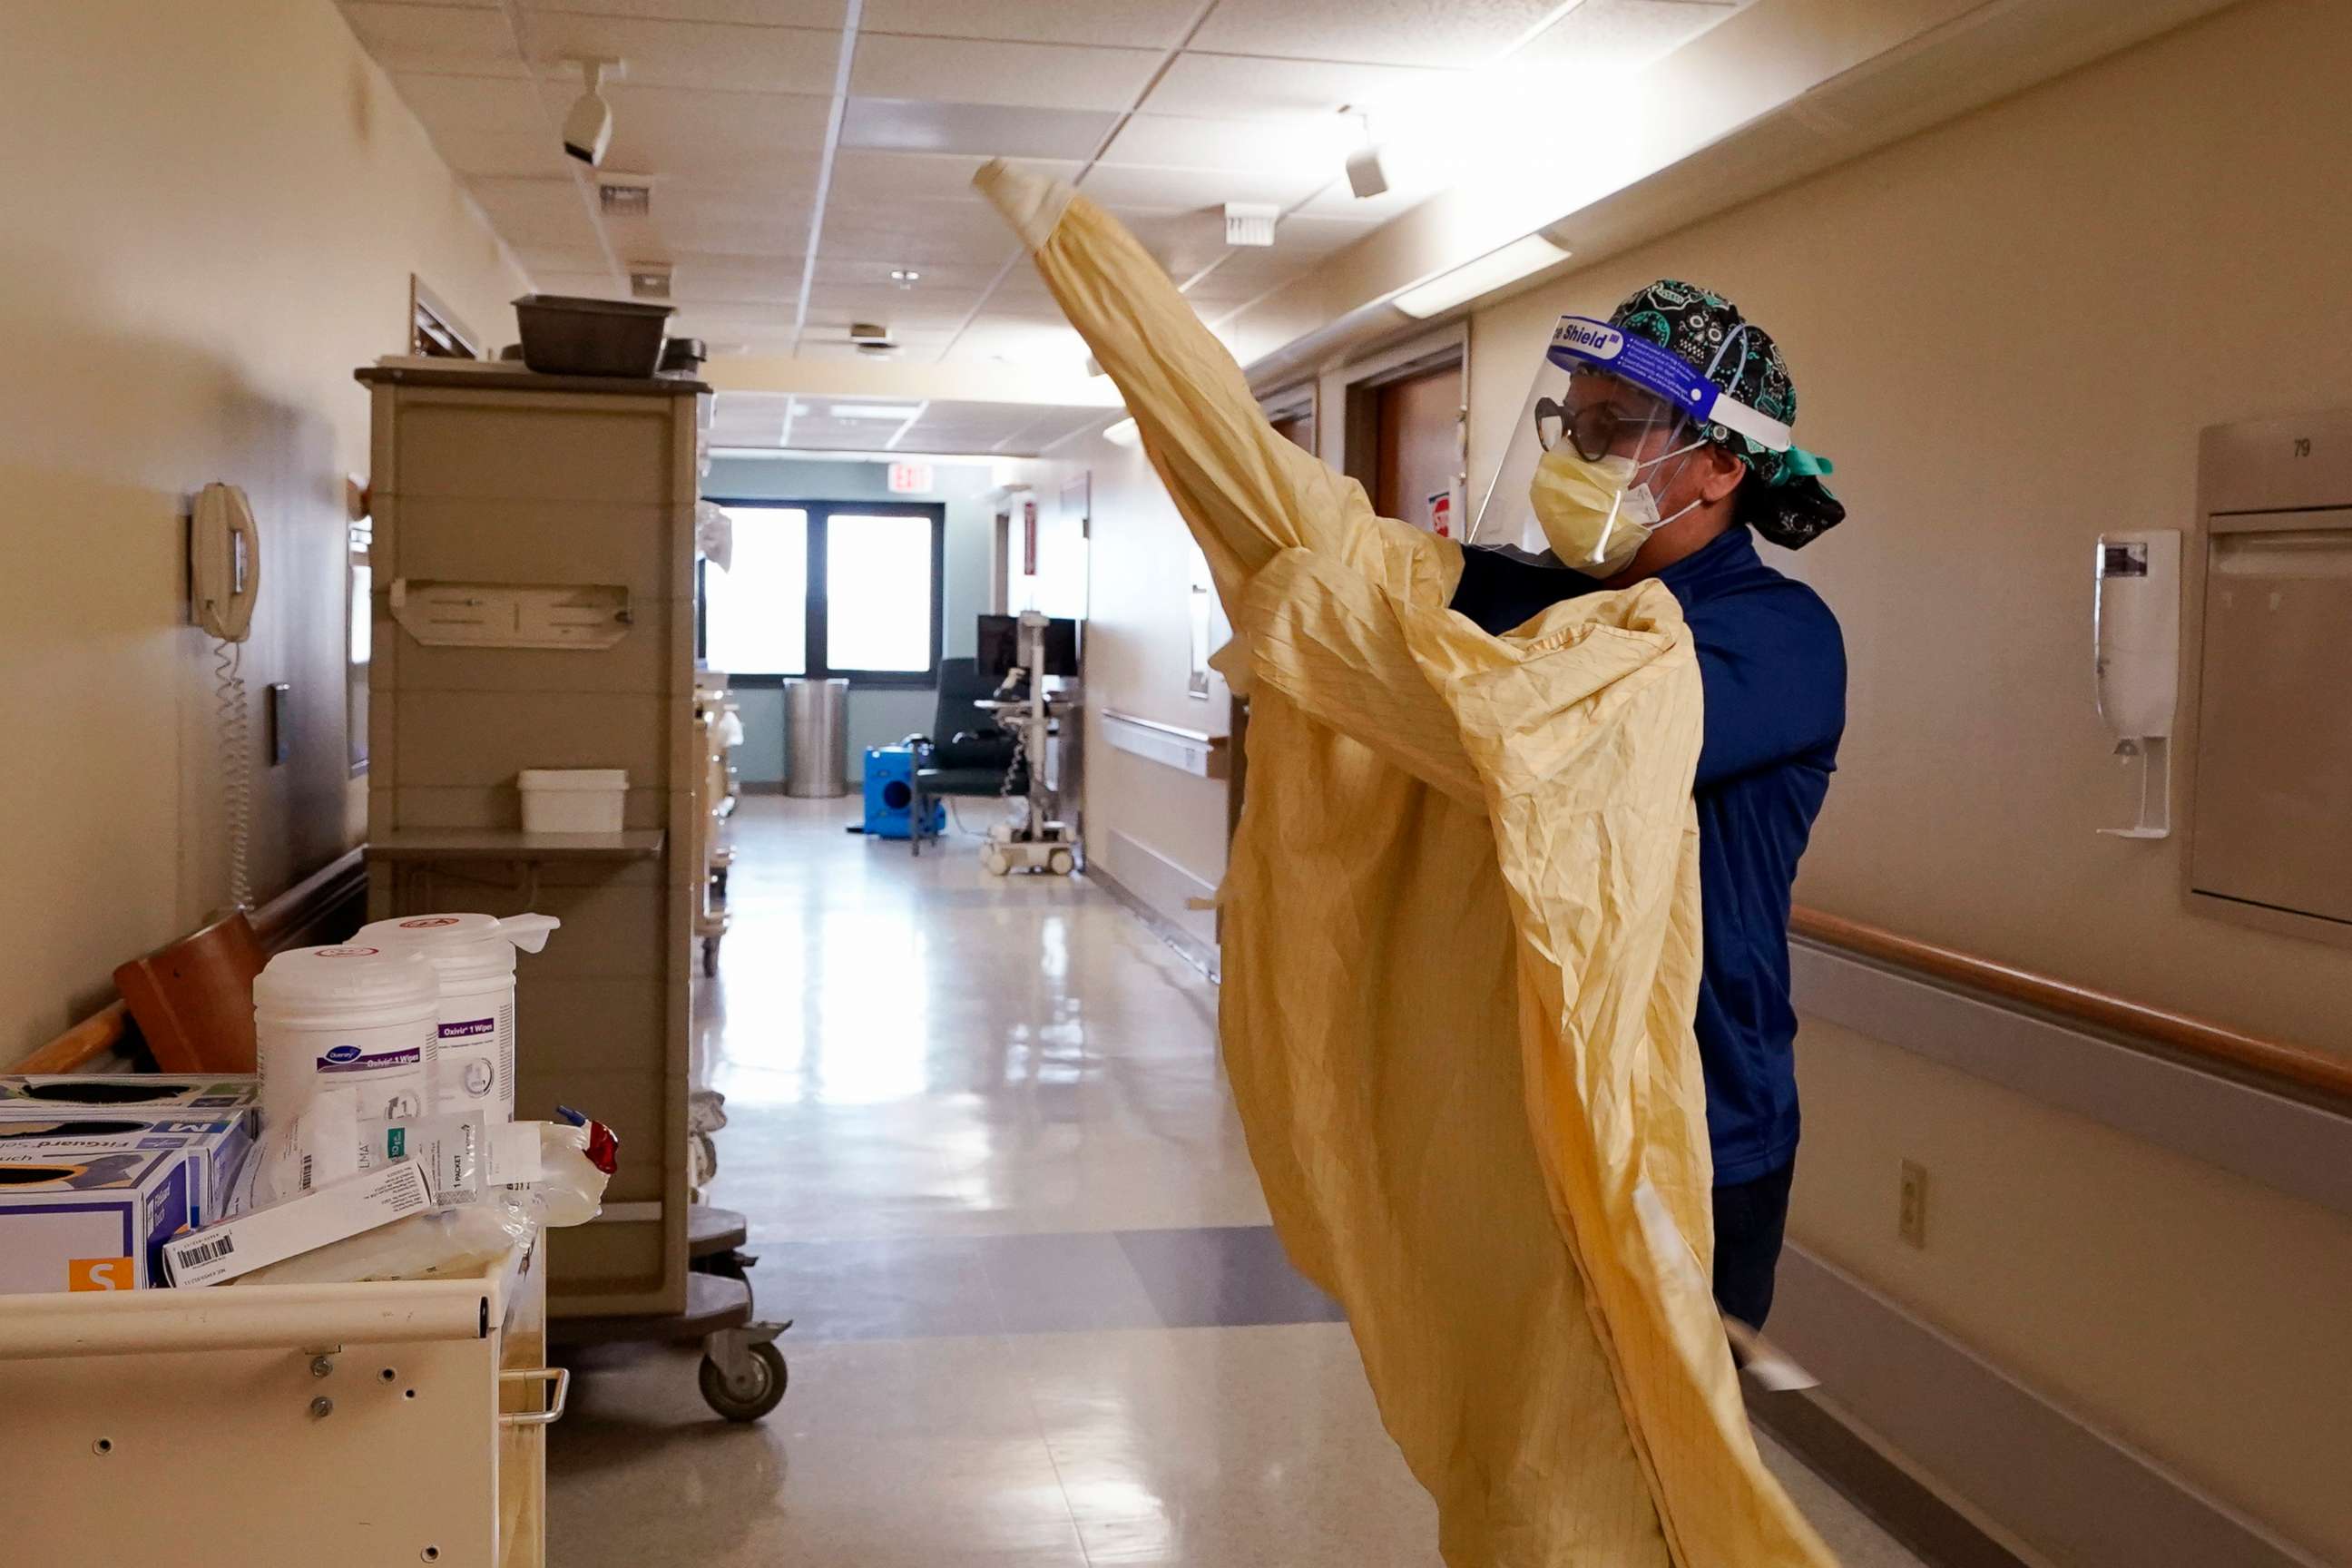 PHOTO: Registered Nurse Monica Quintana dons protective gear before entering a room at the William Beaumont hospital, April 21, 2021, in Royal Oak, Mich.